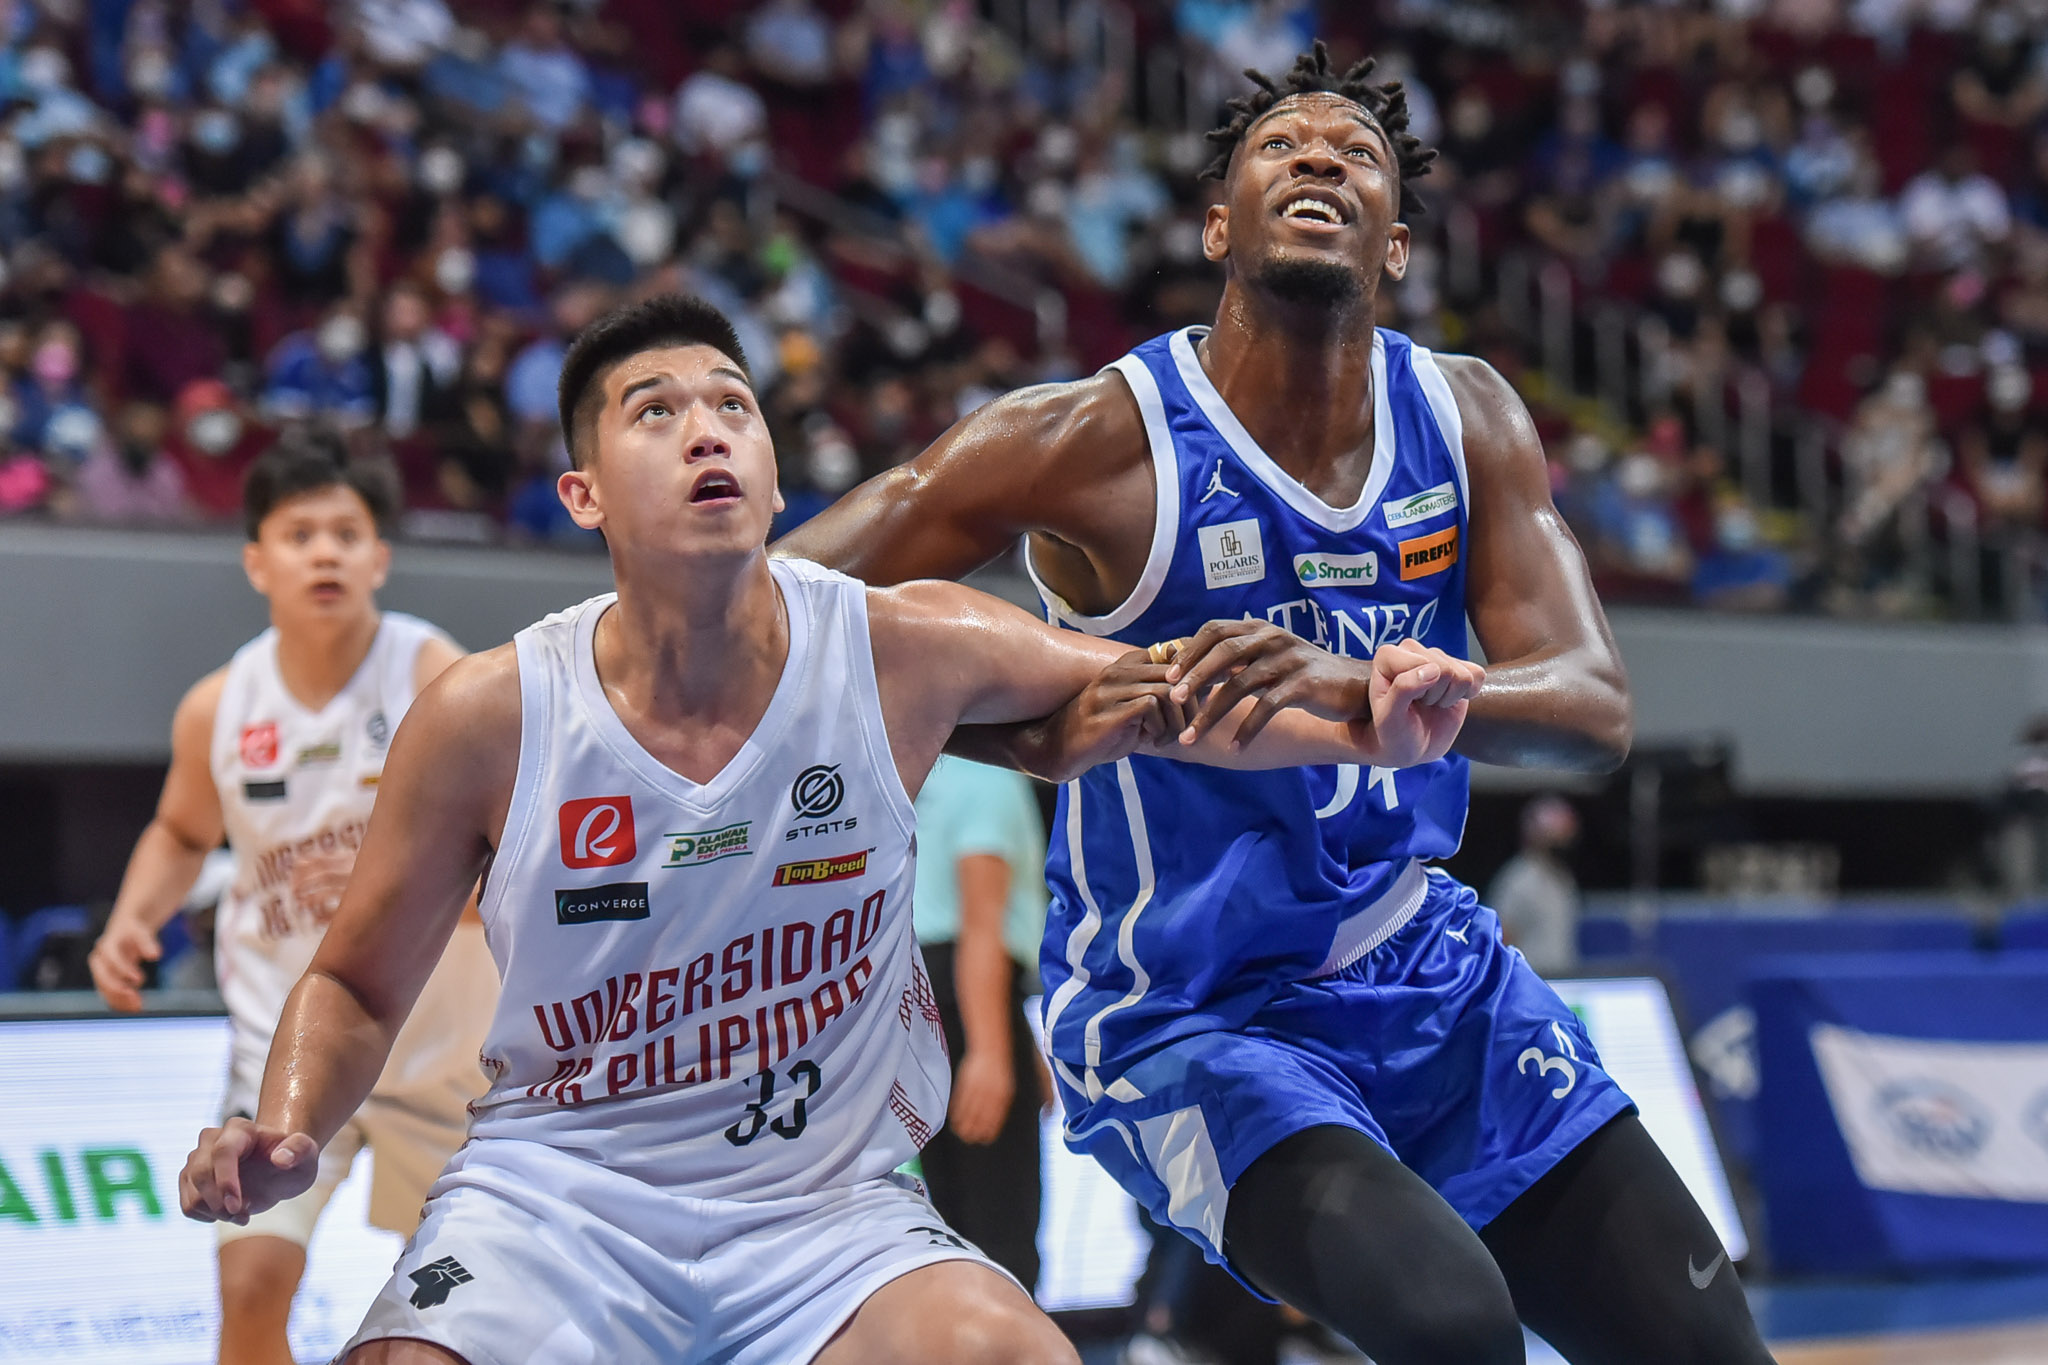 Ateneo vs UP in Game 2 of the UAAP Season 84 men's basketball finals. UAAP PHOTO